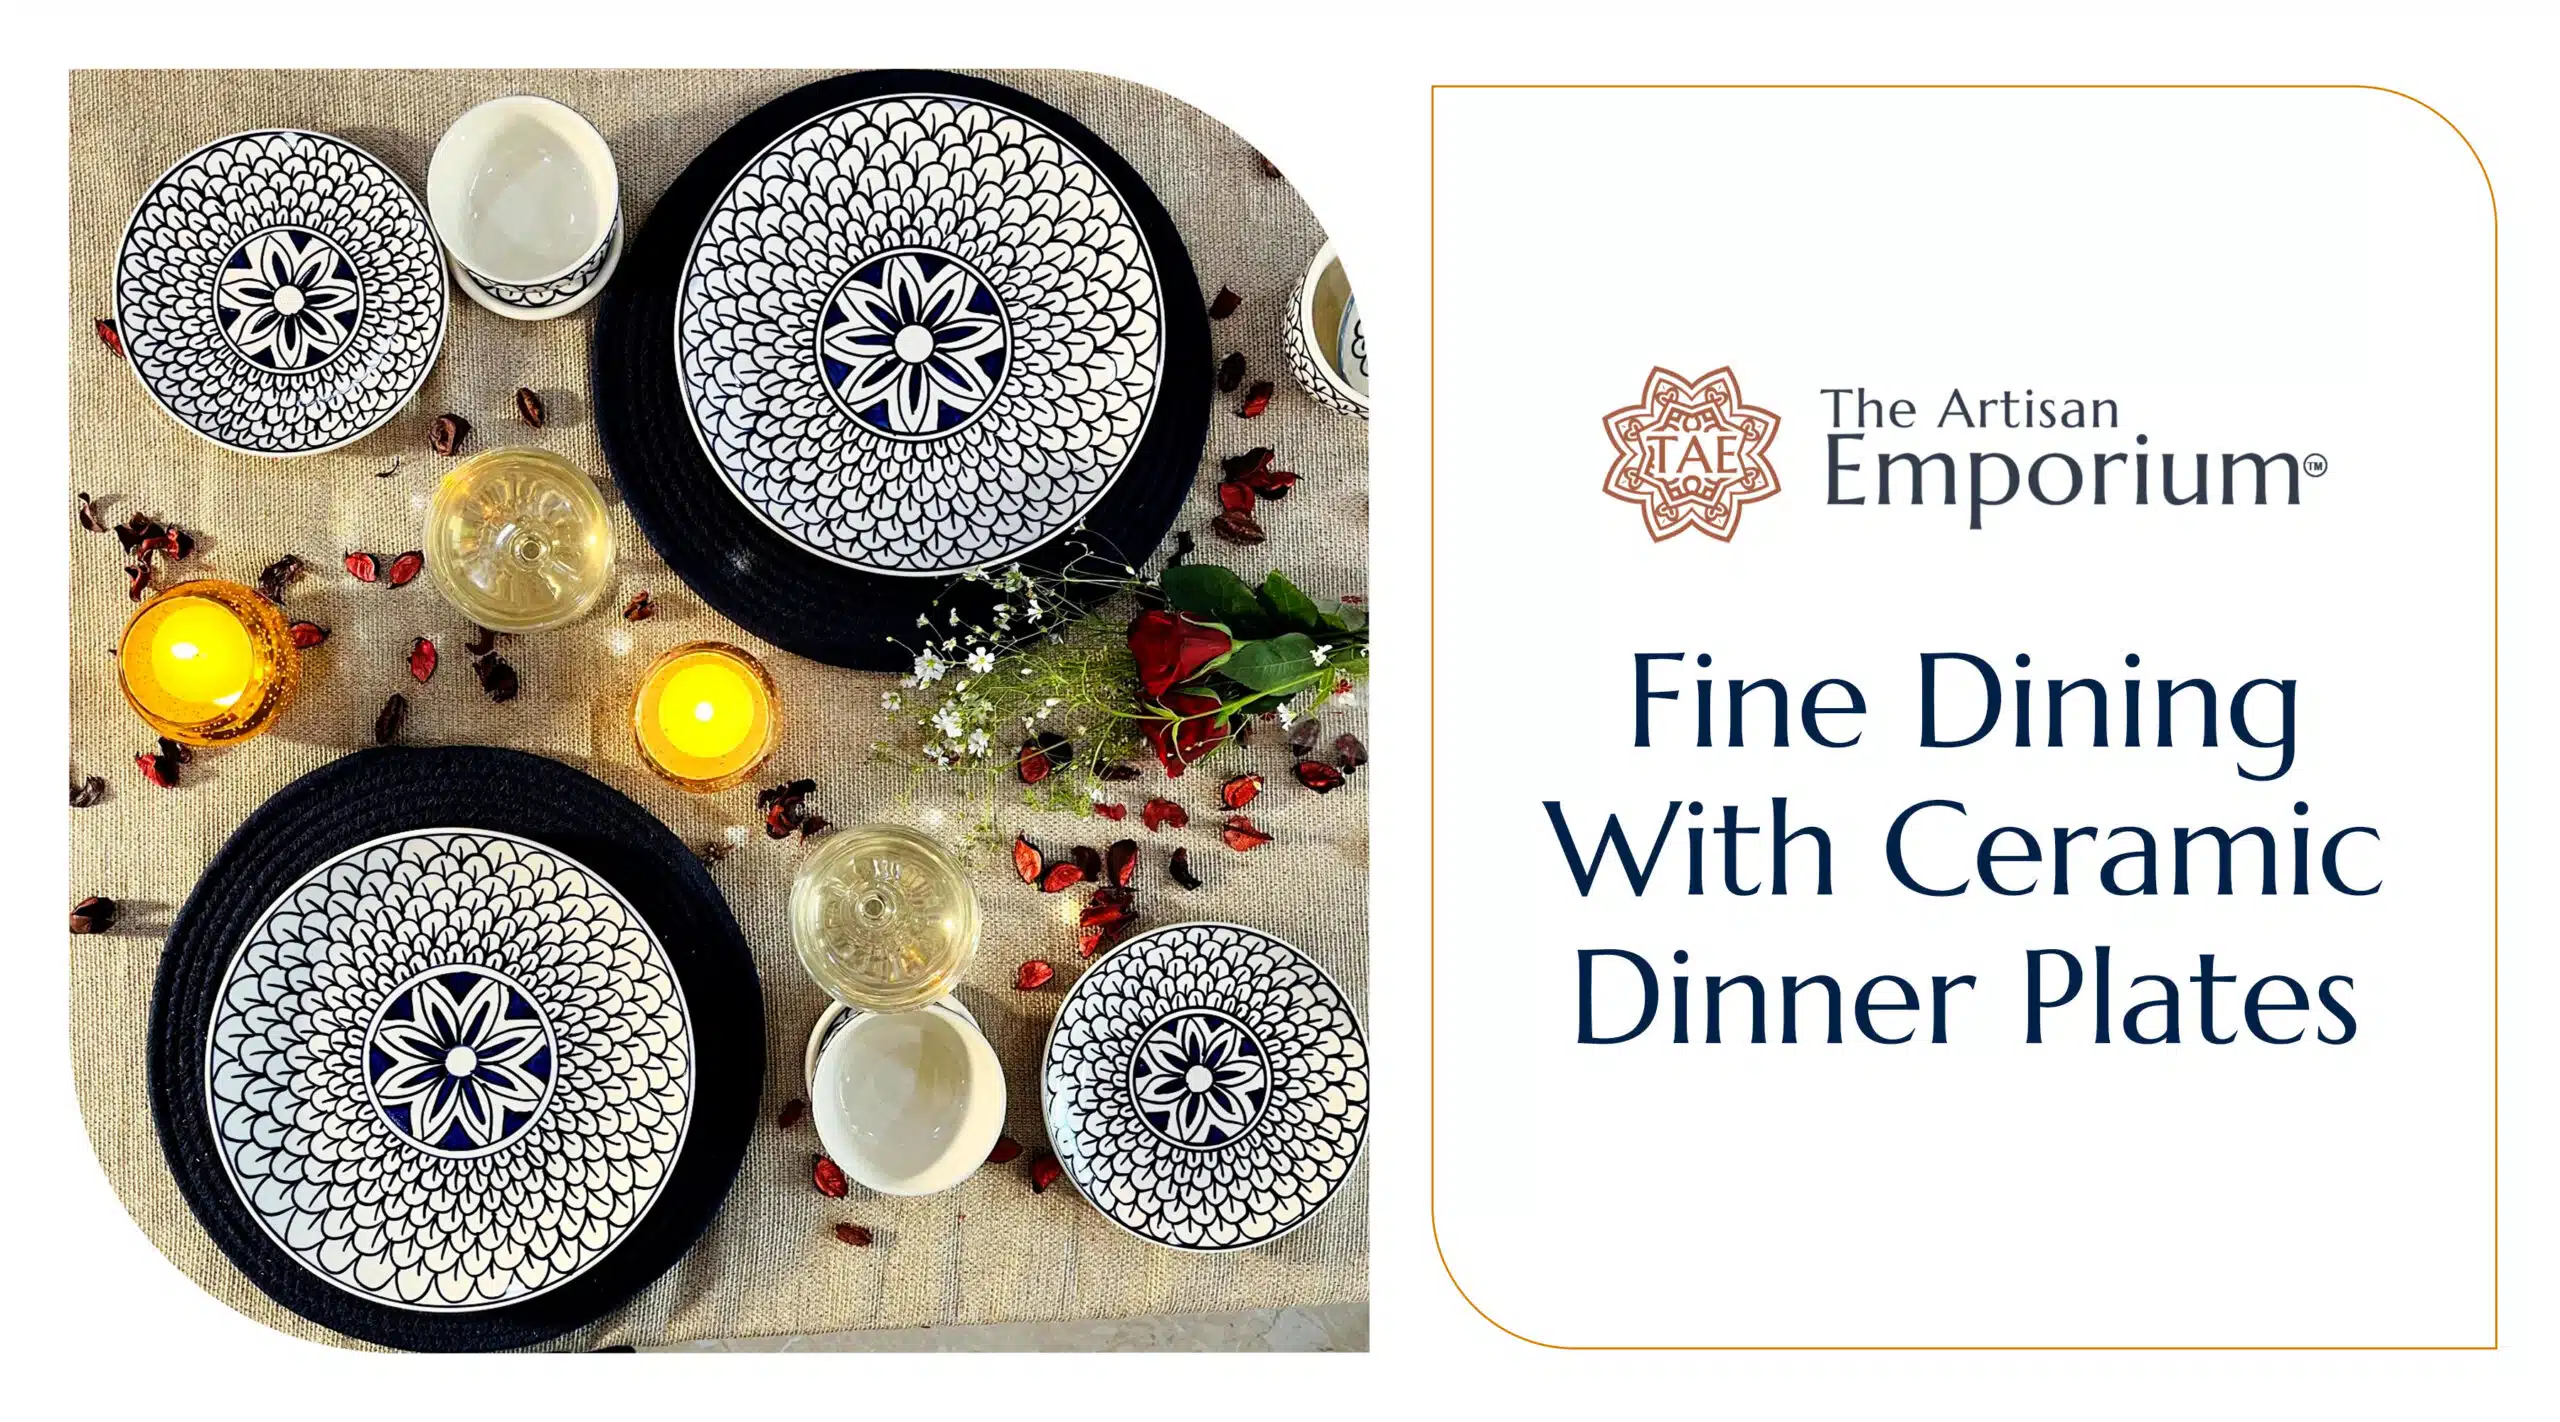 Fine Dining With ceramic Dinner Plates From The Artisan Emporium